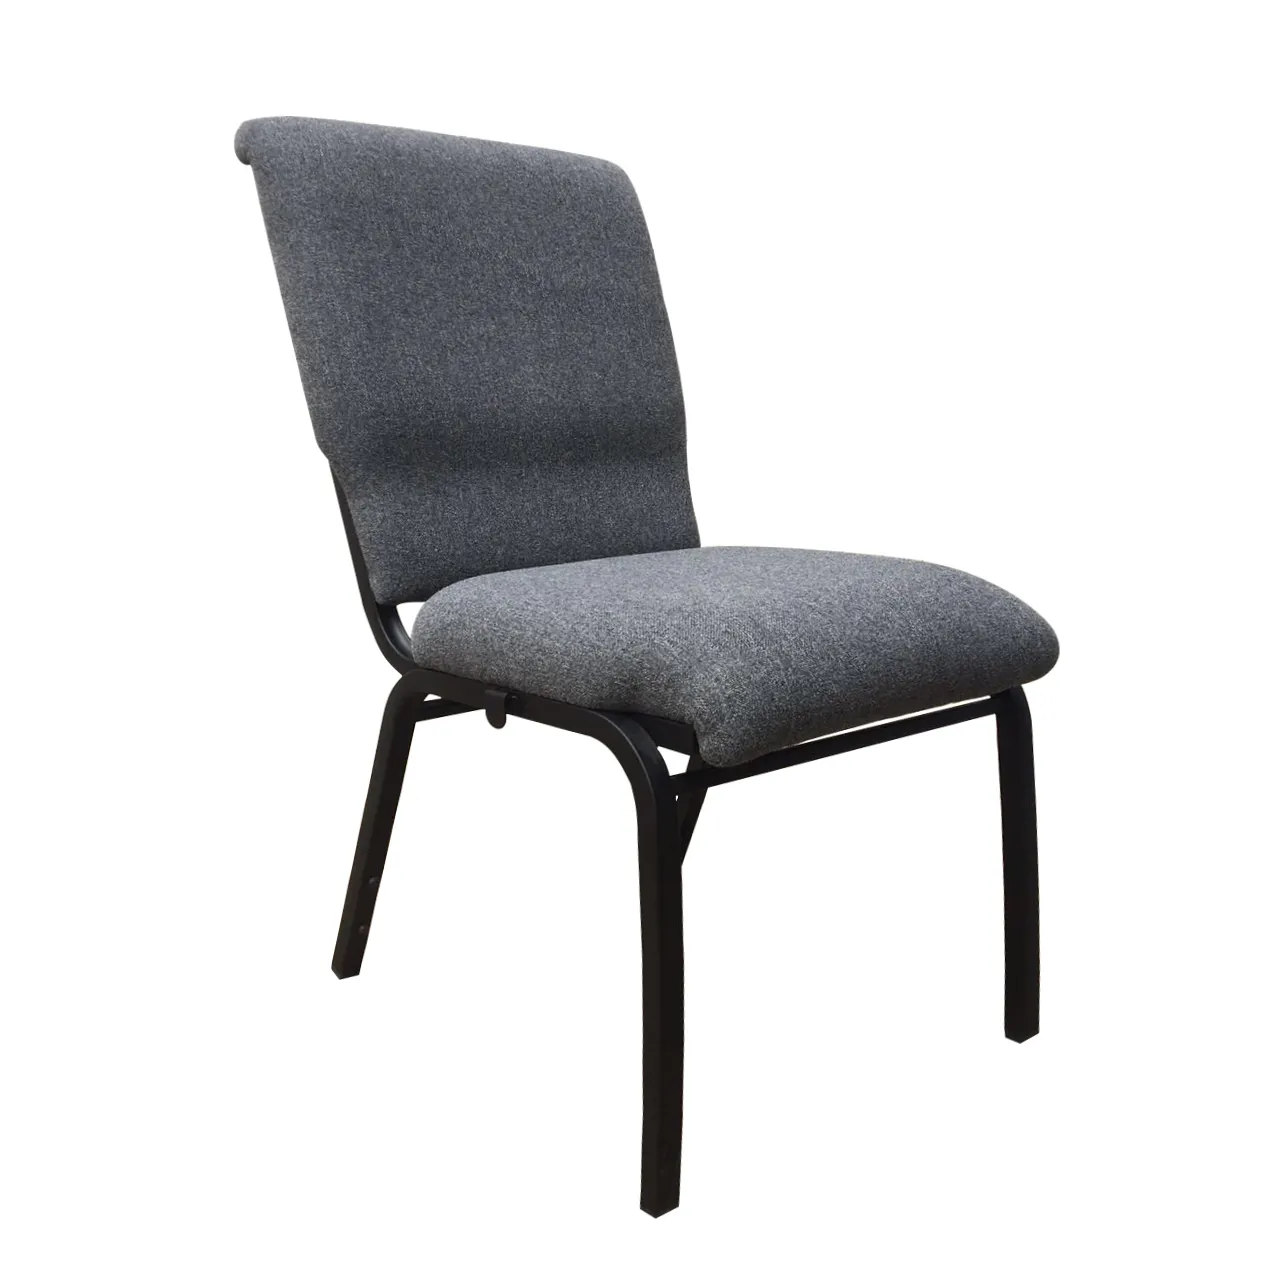 21"wide china Wholesale price iron back box padded design metal stacking church chair in gray fabric